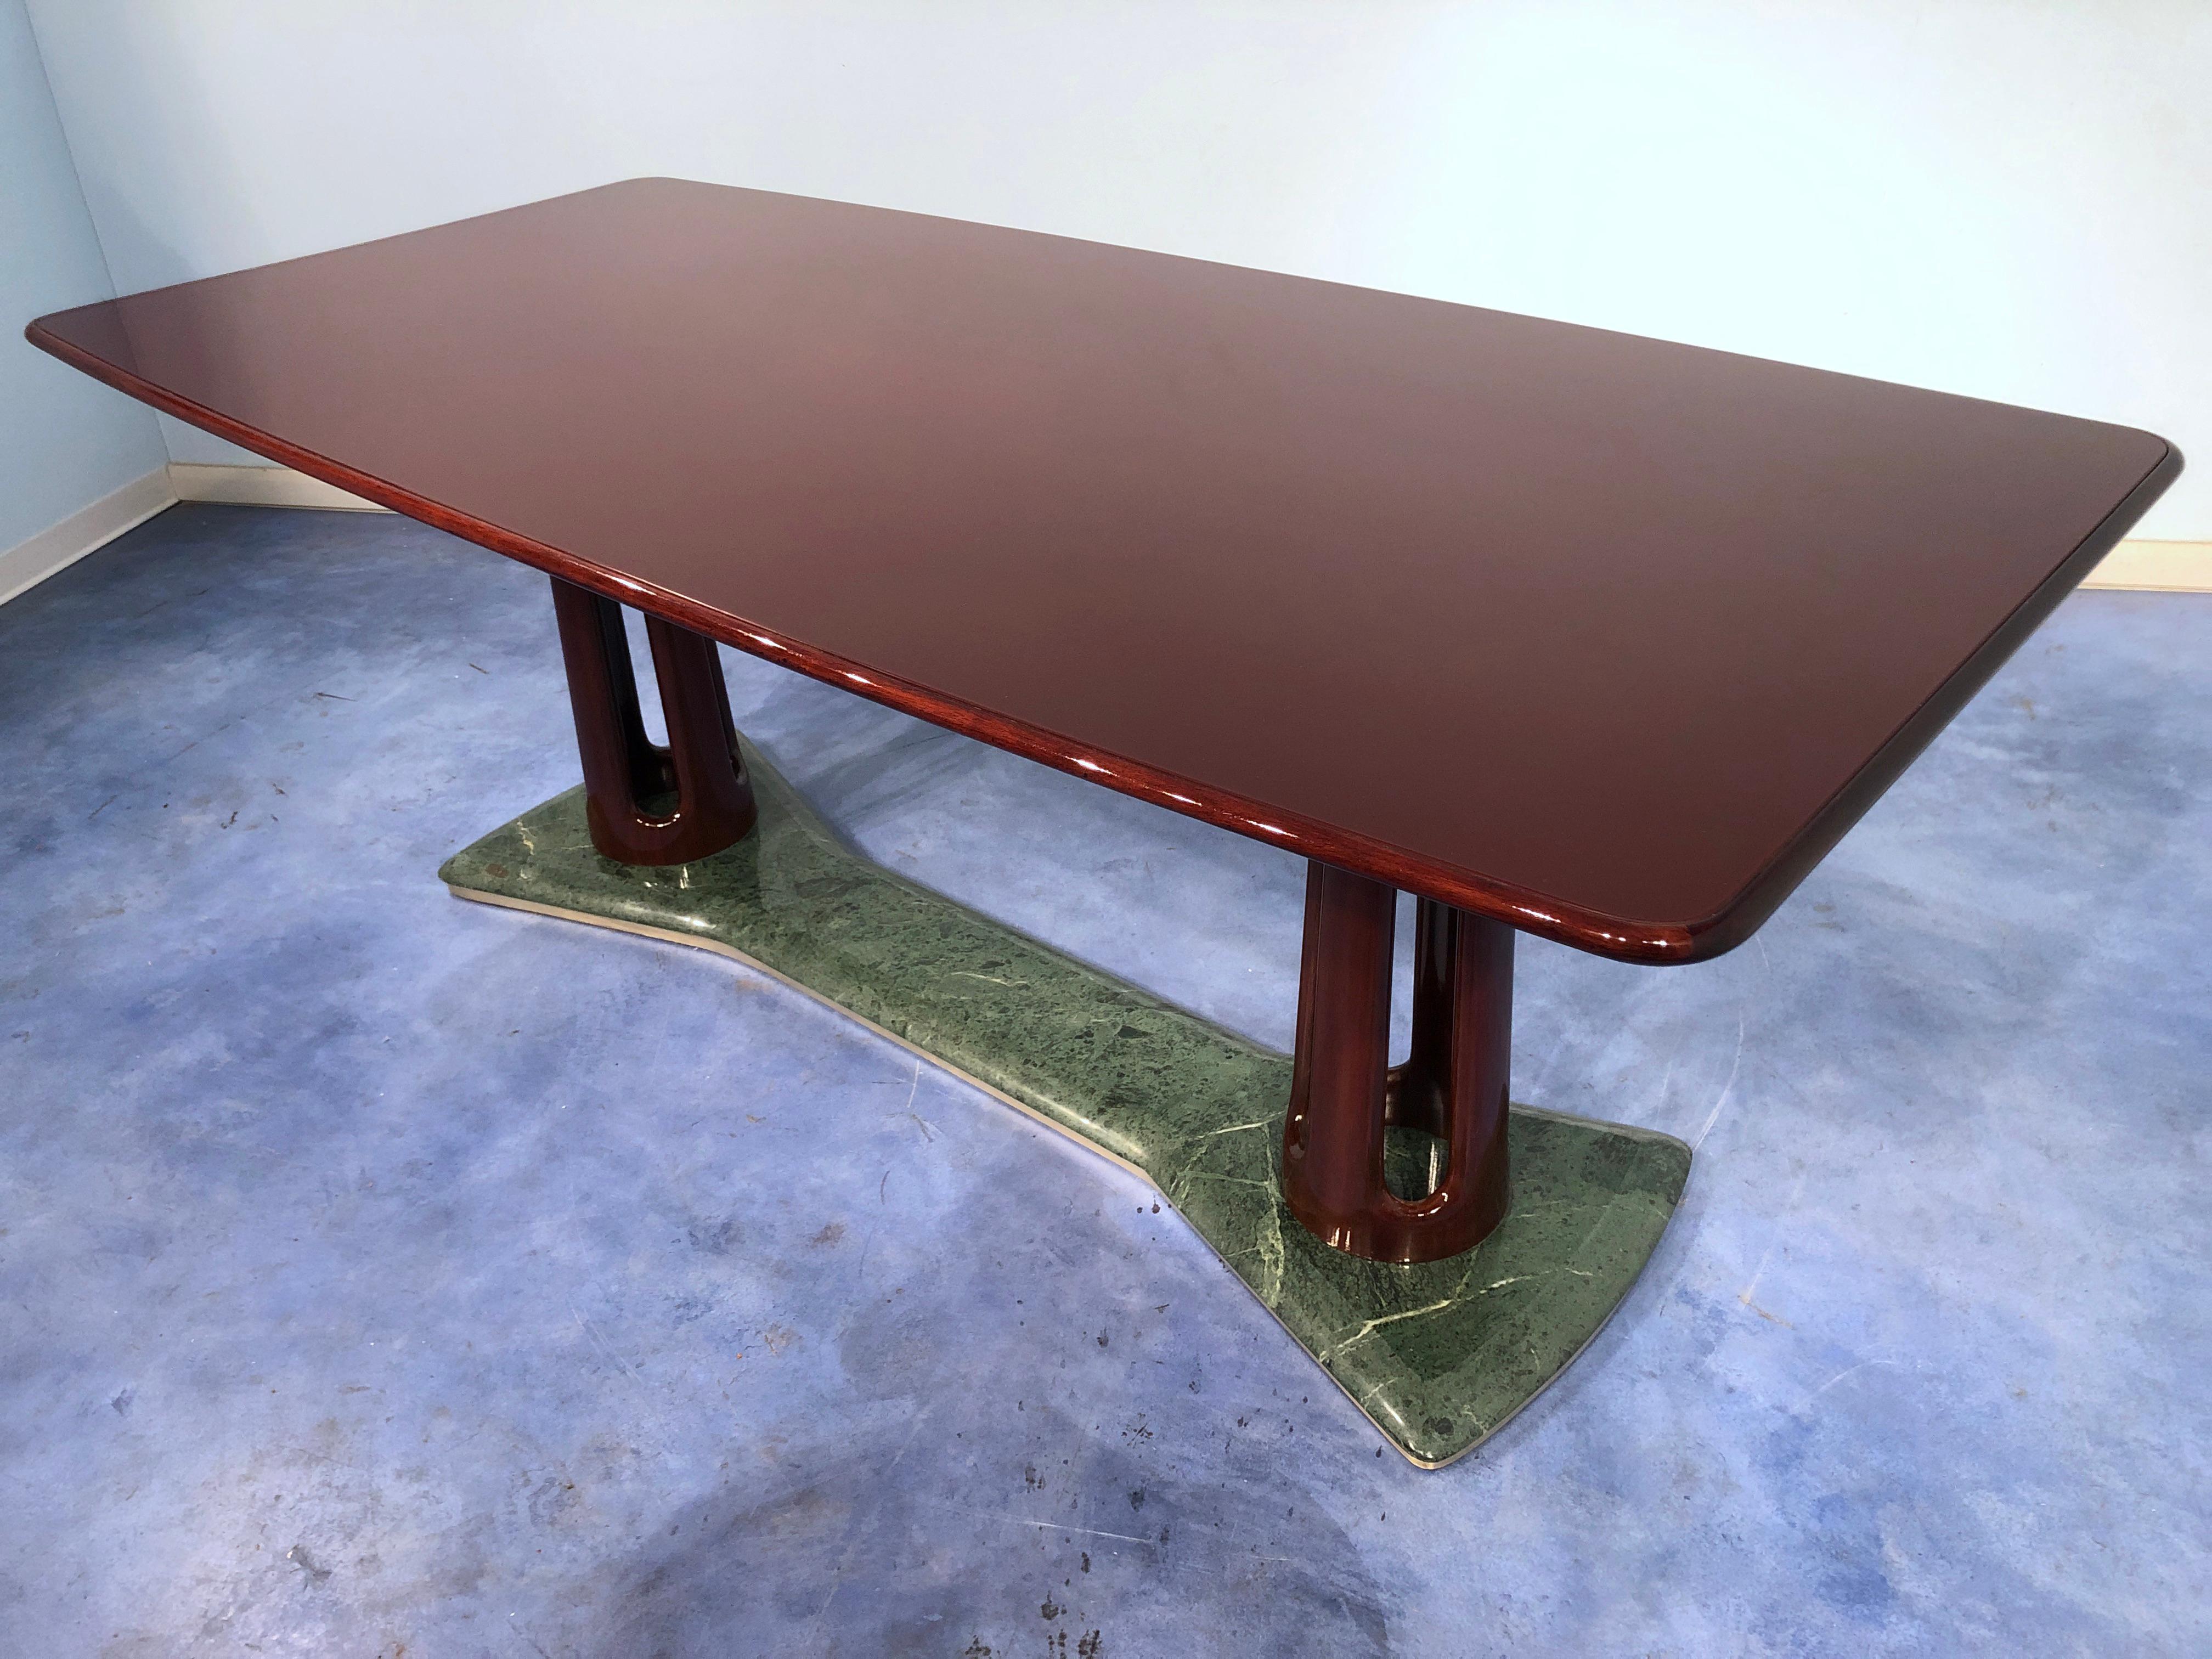 Italian Mid-Century Modern Dining Table by Vittorio Dassi, 1950s In Good Condition For Sale In Traversetolo, IT